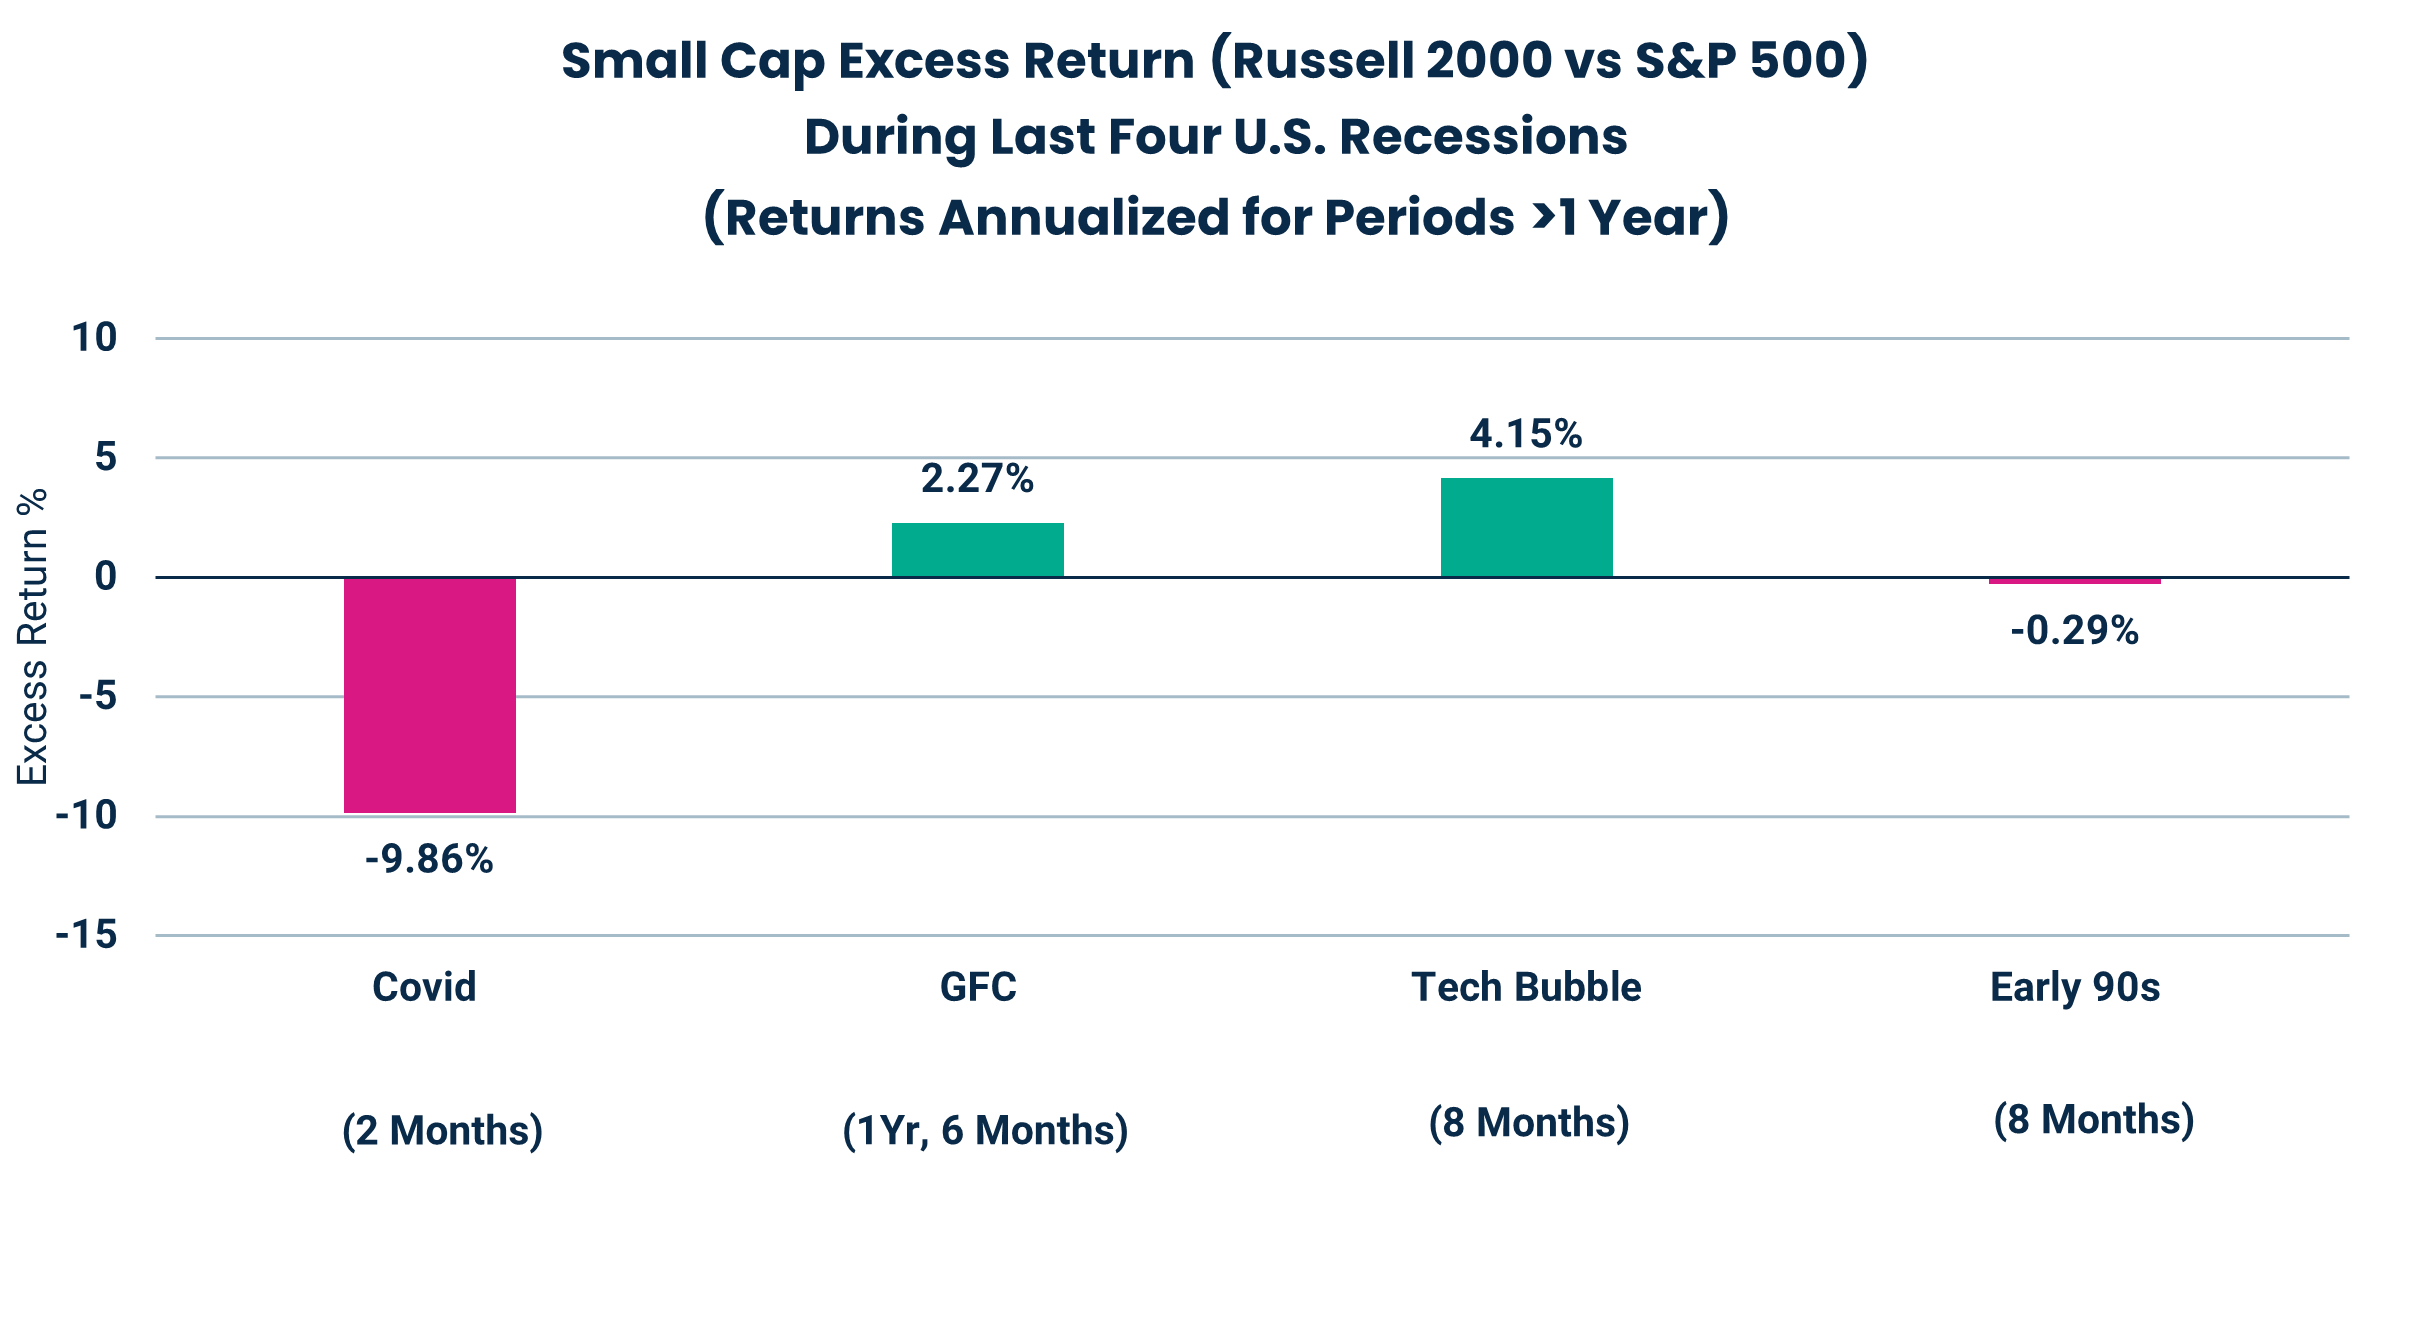 Small Cap Excess Return (Russell 2000 vs S&P 500)
During Last Four U.S. Recessions
(Returns Annualized for Periods >1 Year)